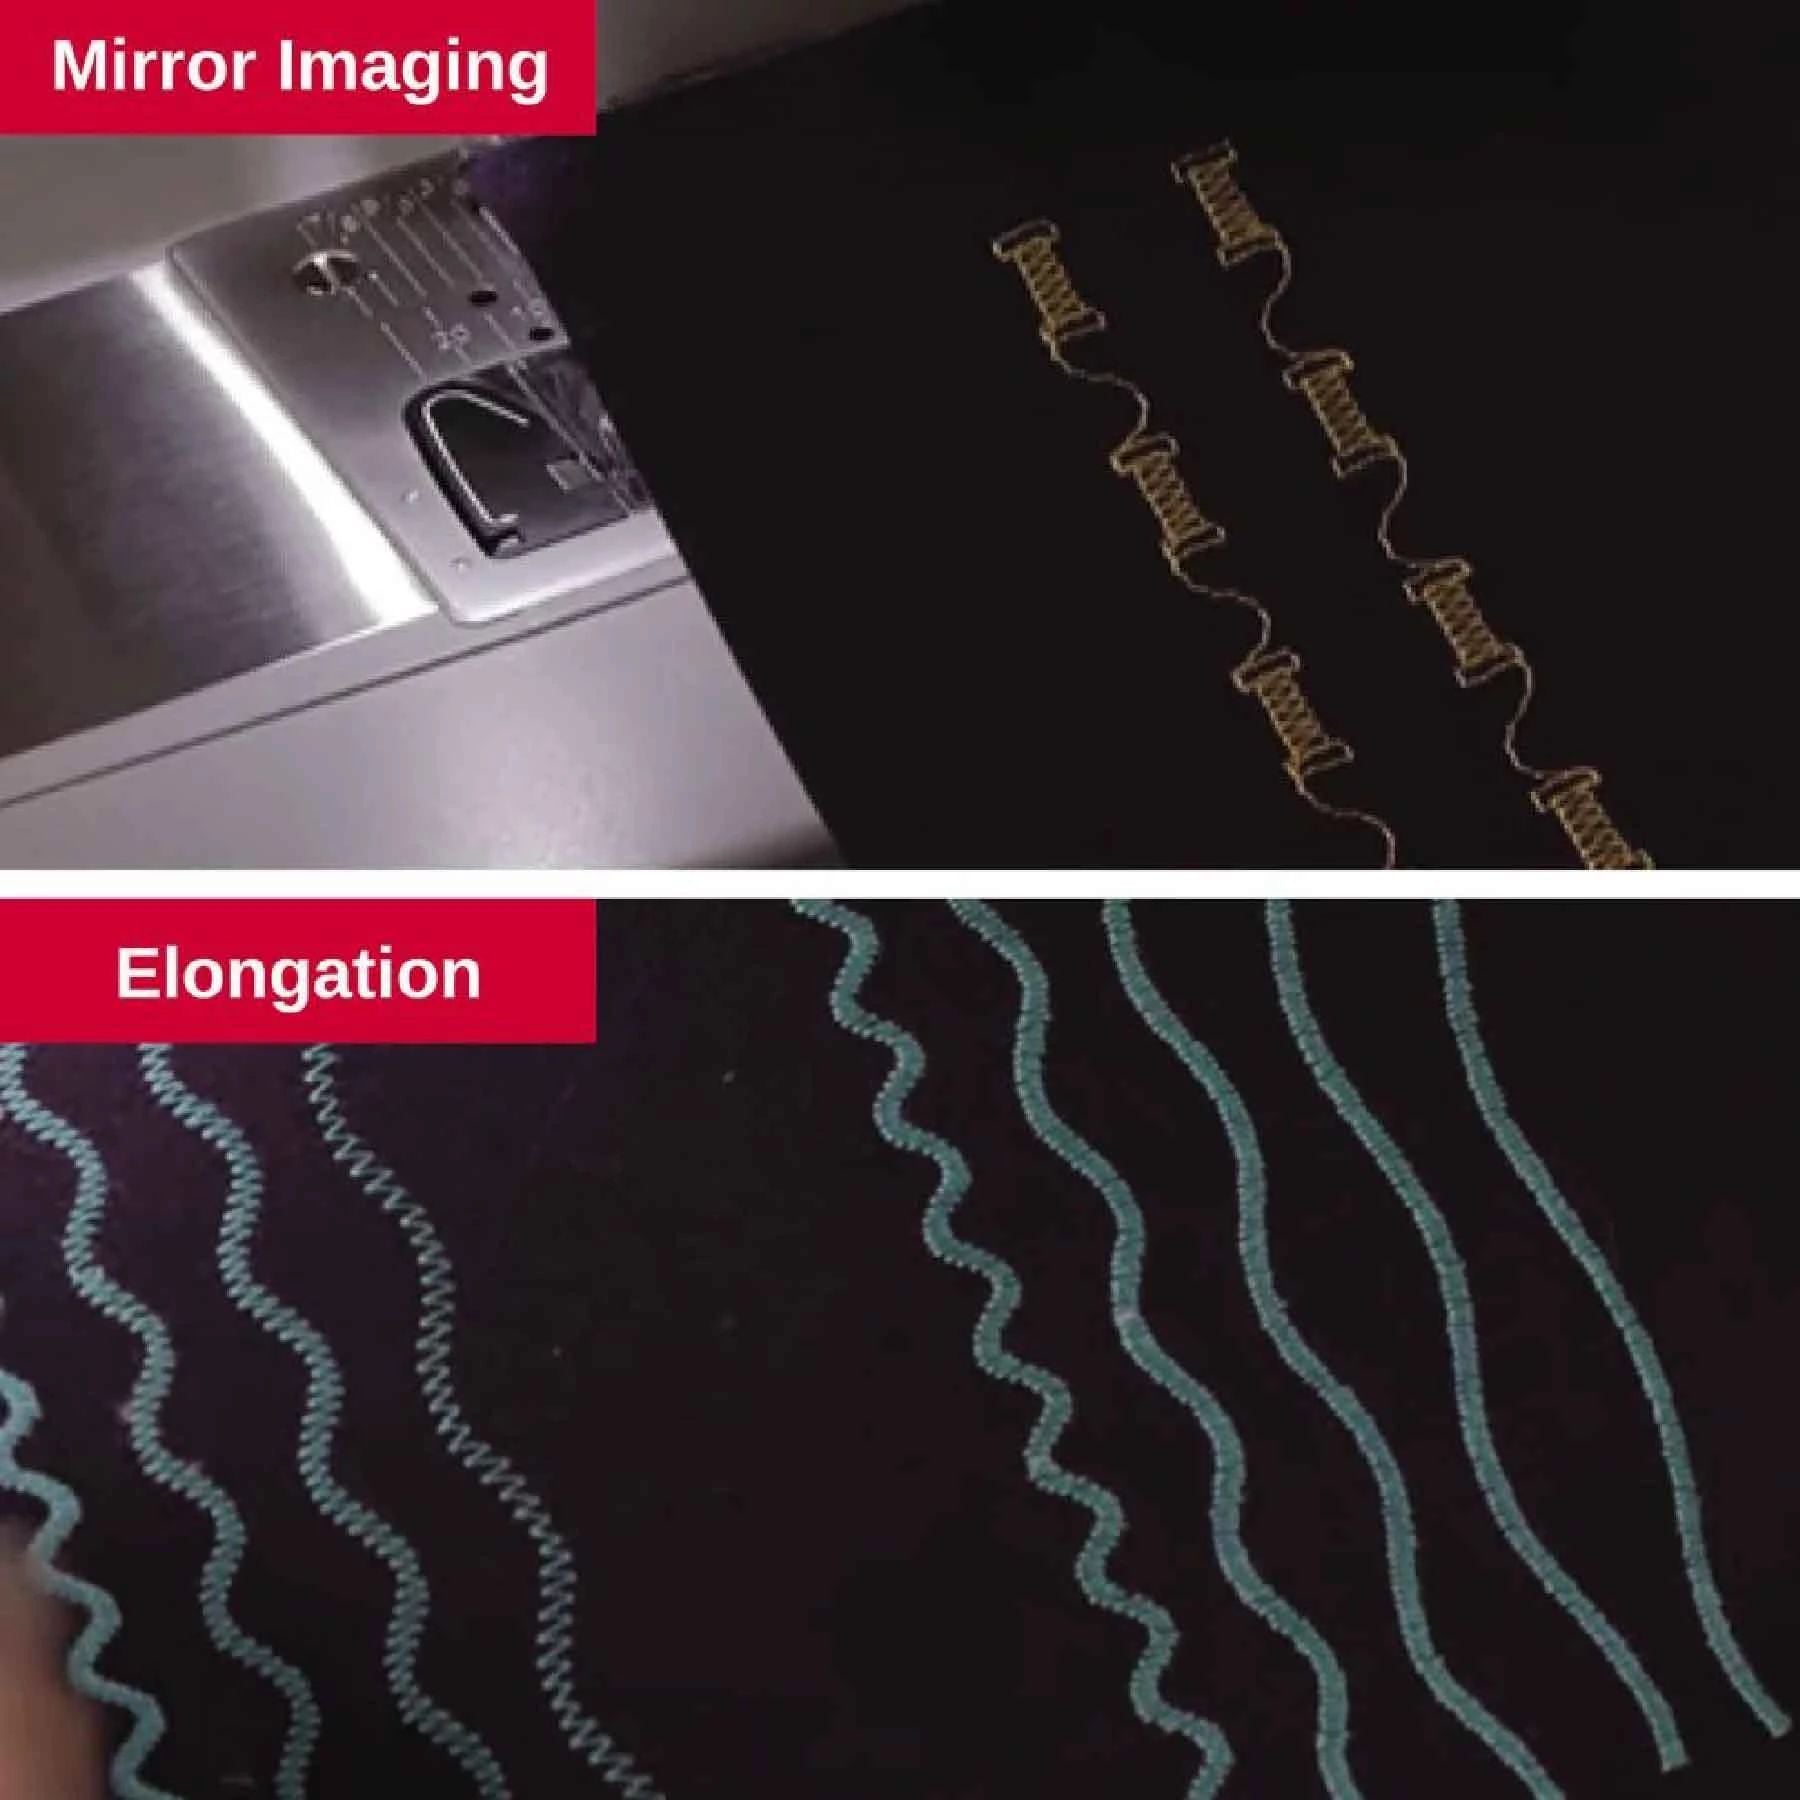 Example image of mirror imaging and elongation features of the Singer Heavy Duty 6800C computerized sewing machine.